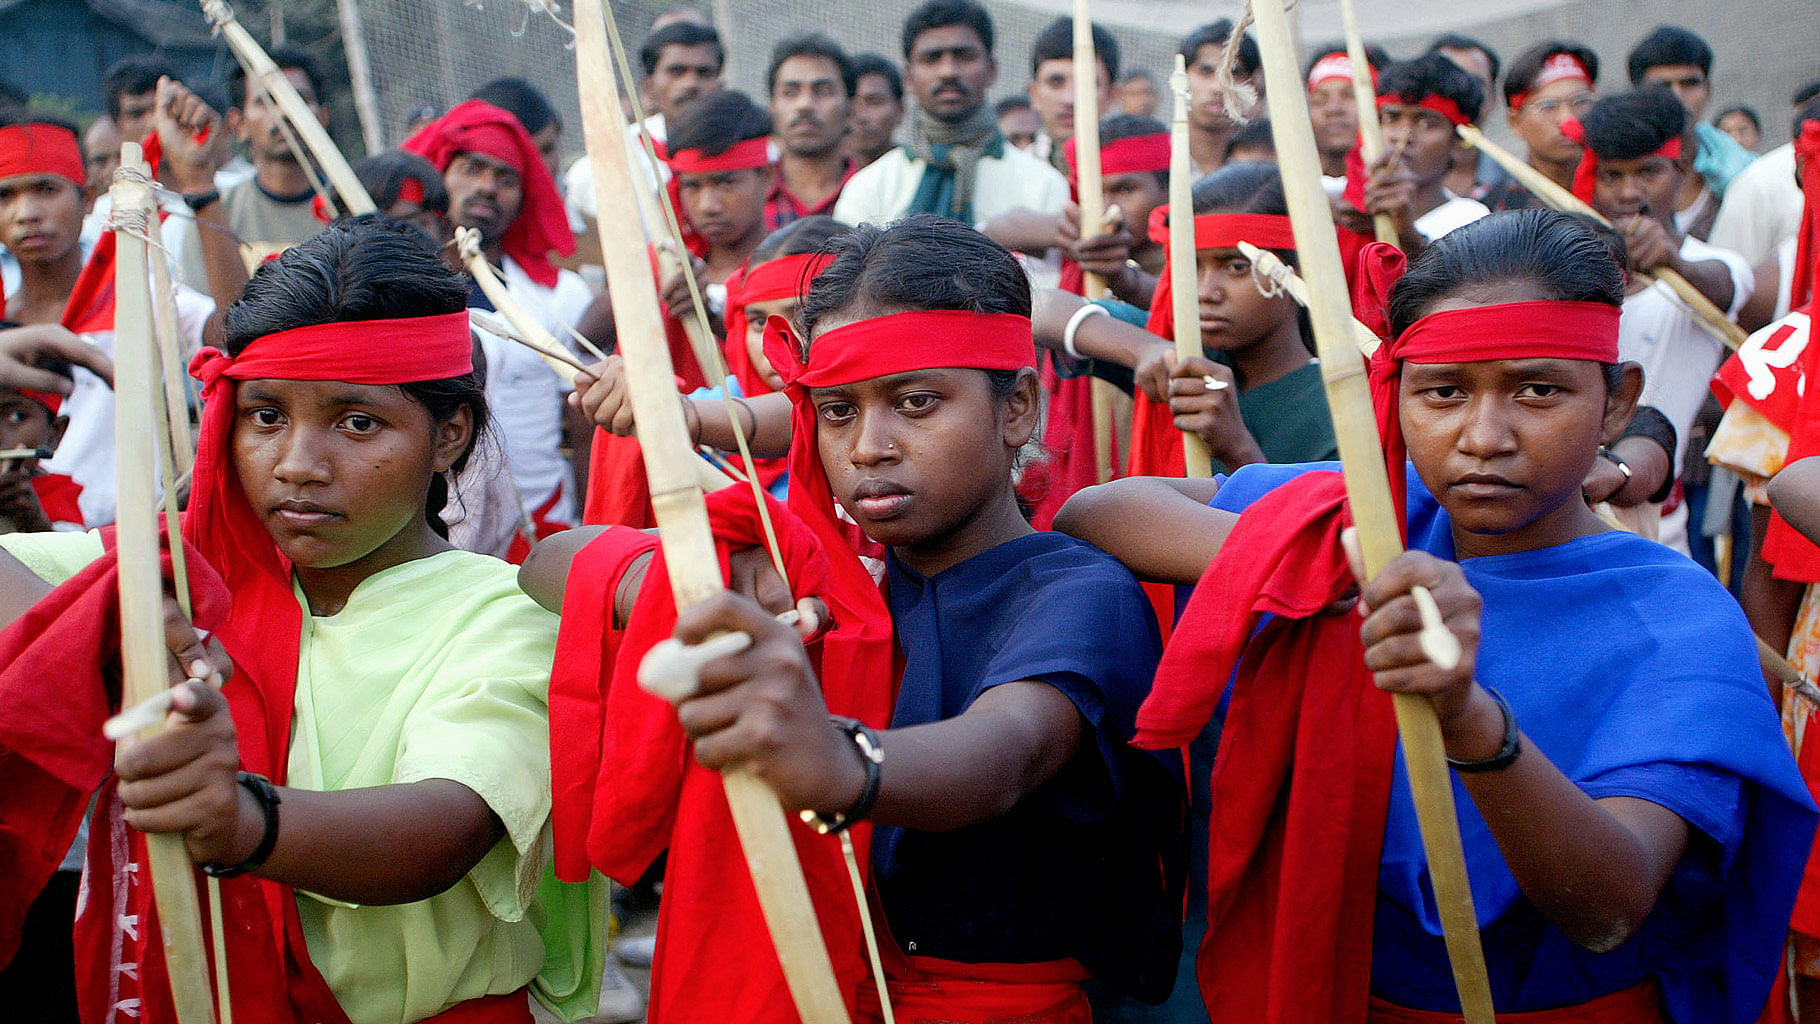 File photo of Naxalites posing with bows and arrows during a rally. Image used for representational purposes. (Photo: Reuters)